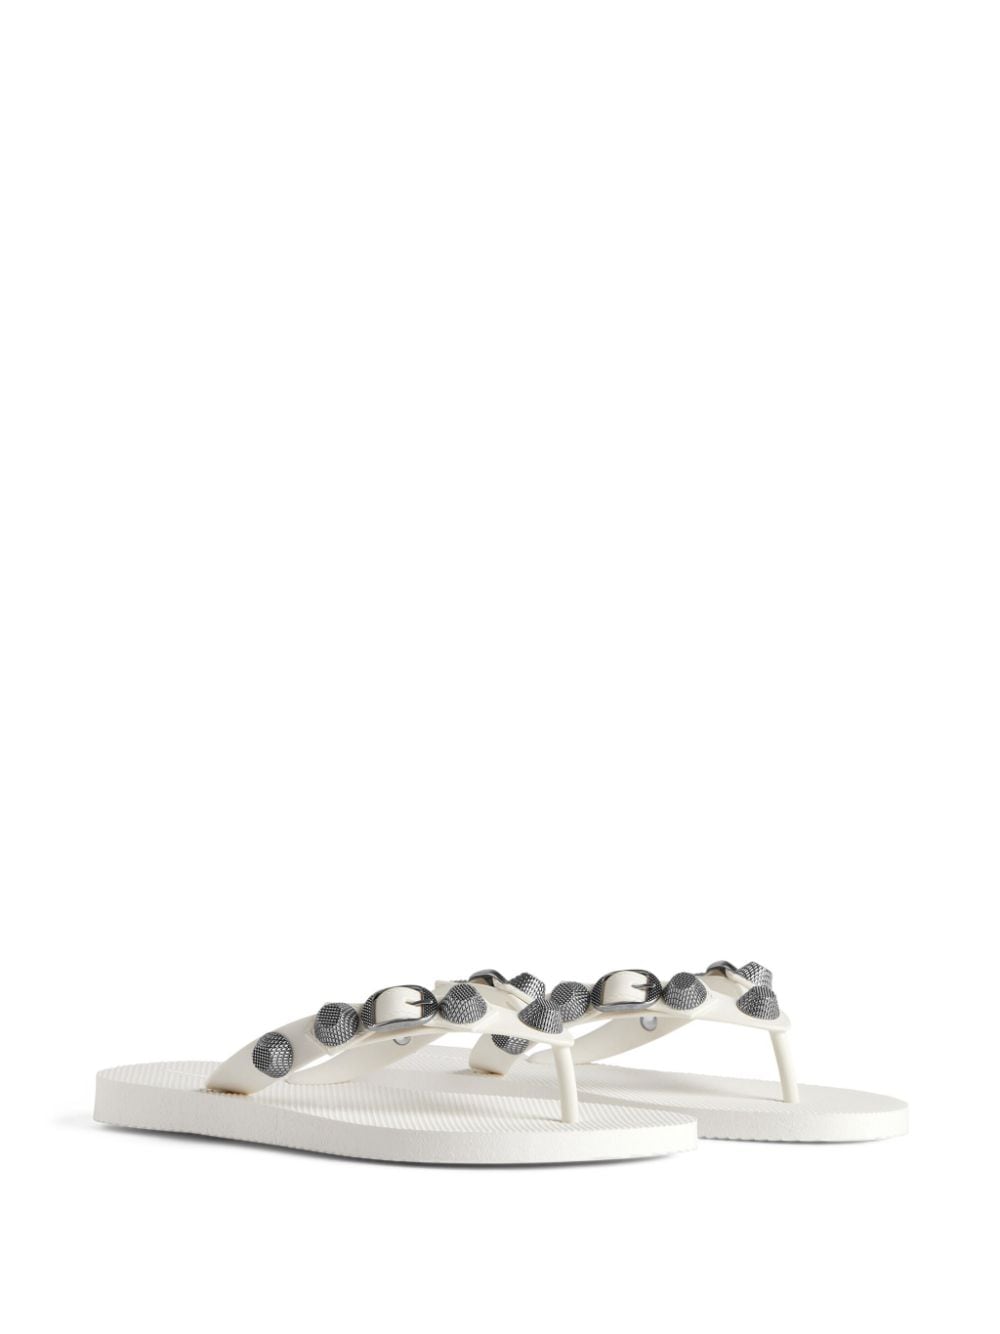 Shop Balenciaga Cagole Studded Sandals In Weiss